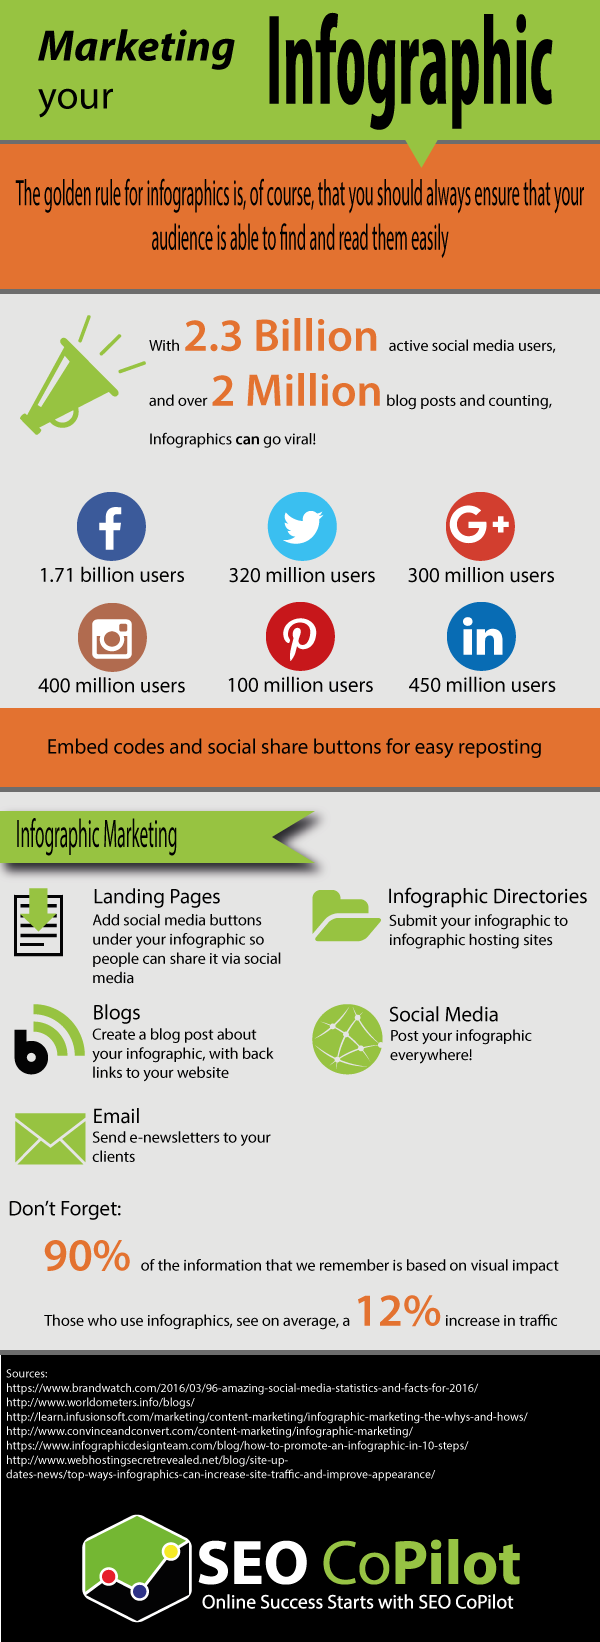 Marketing your infographic